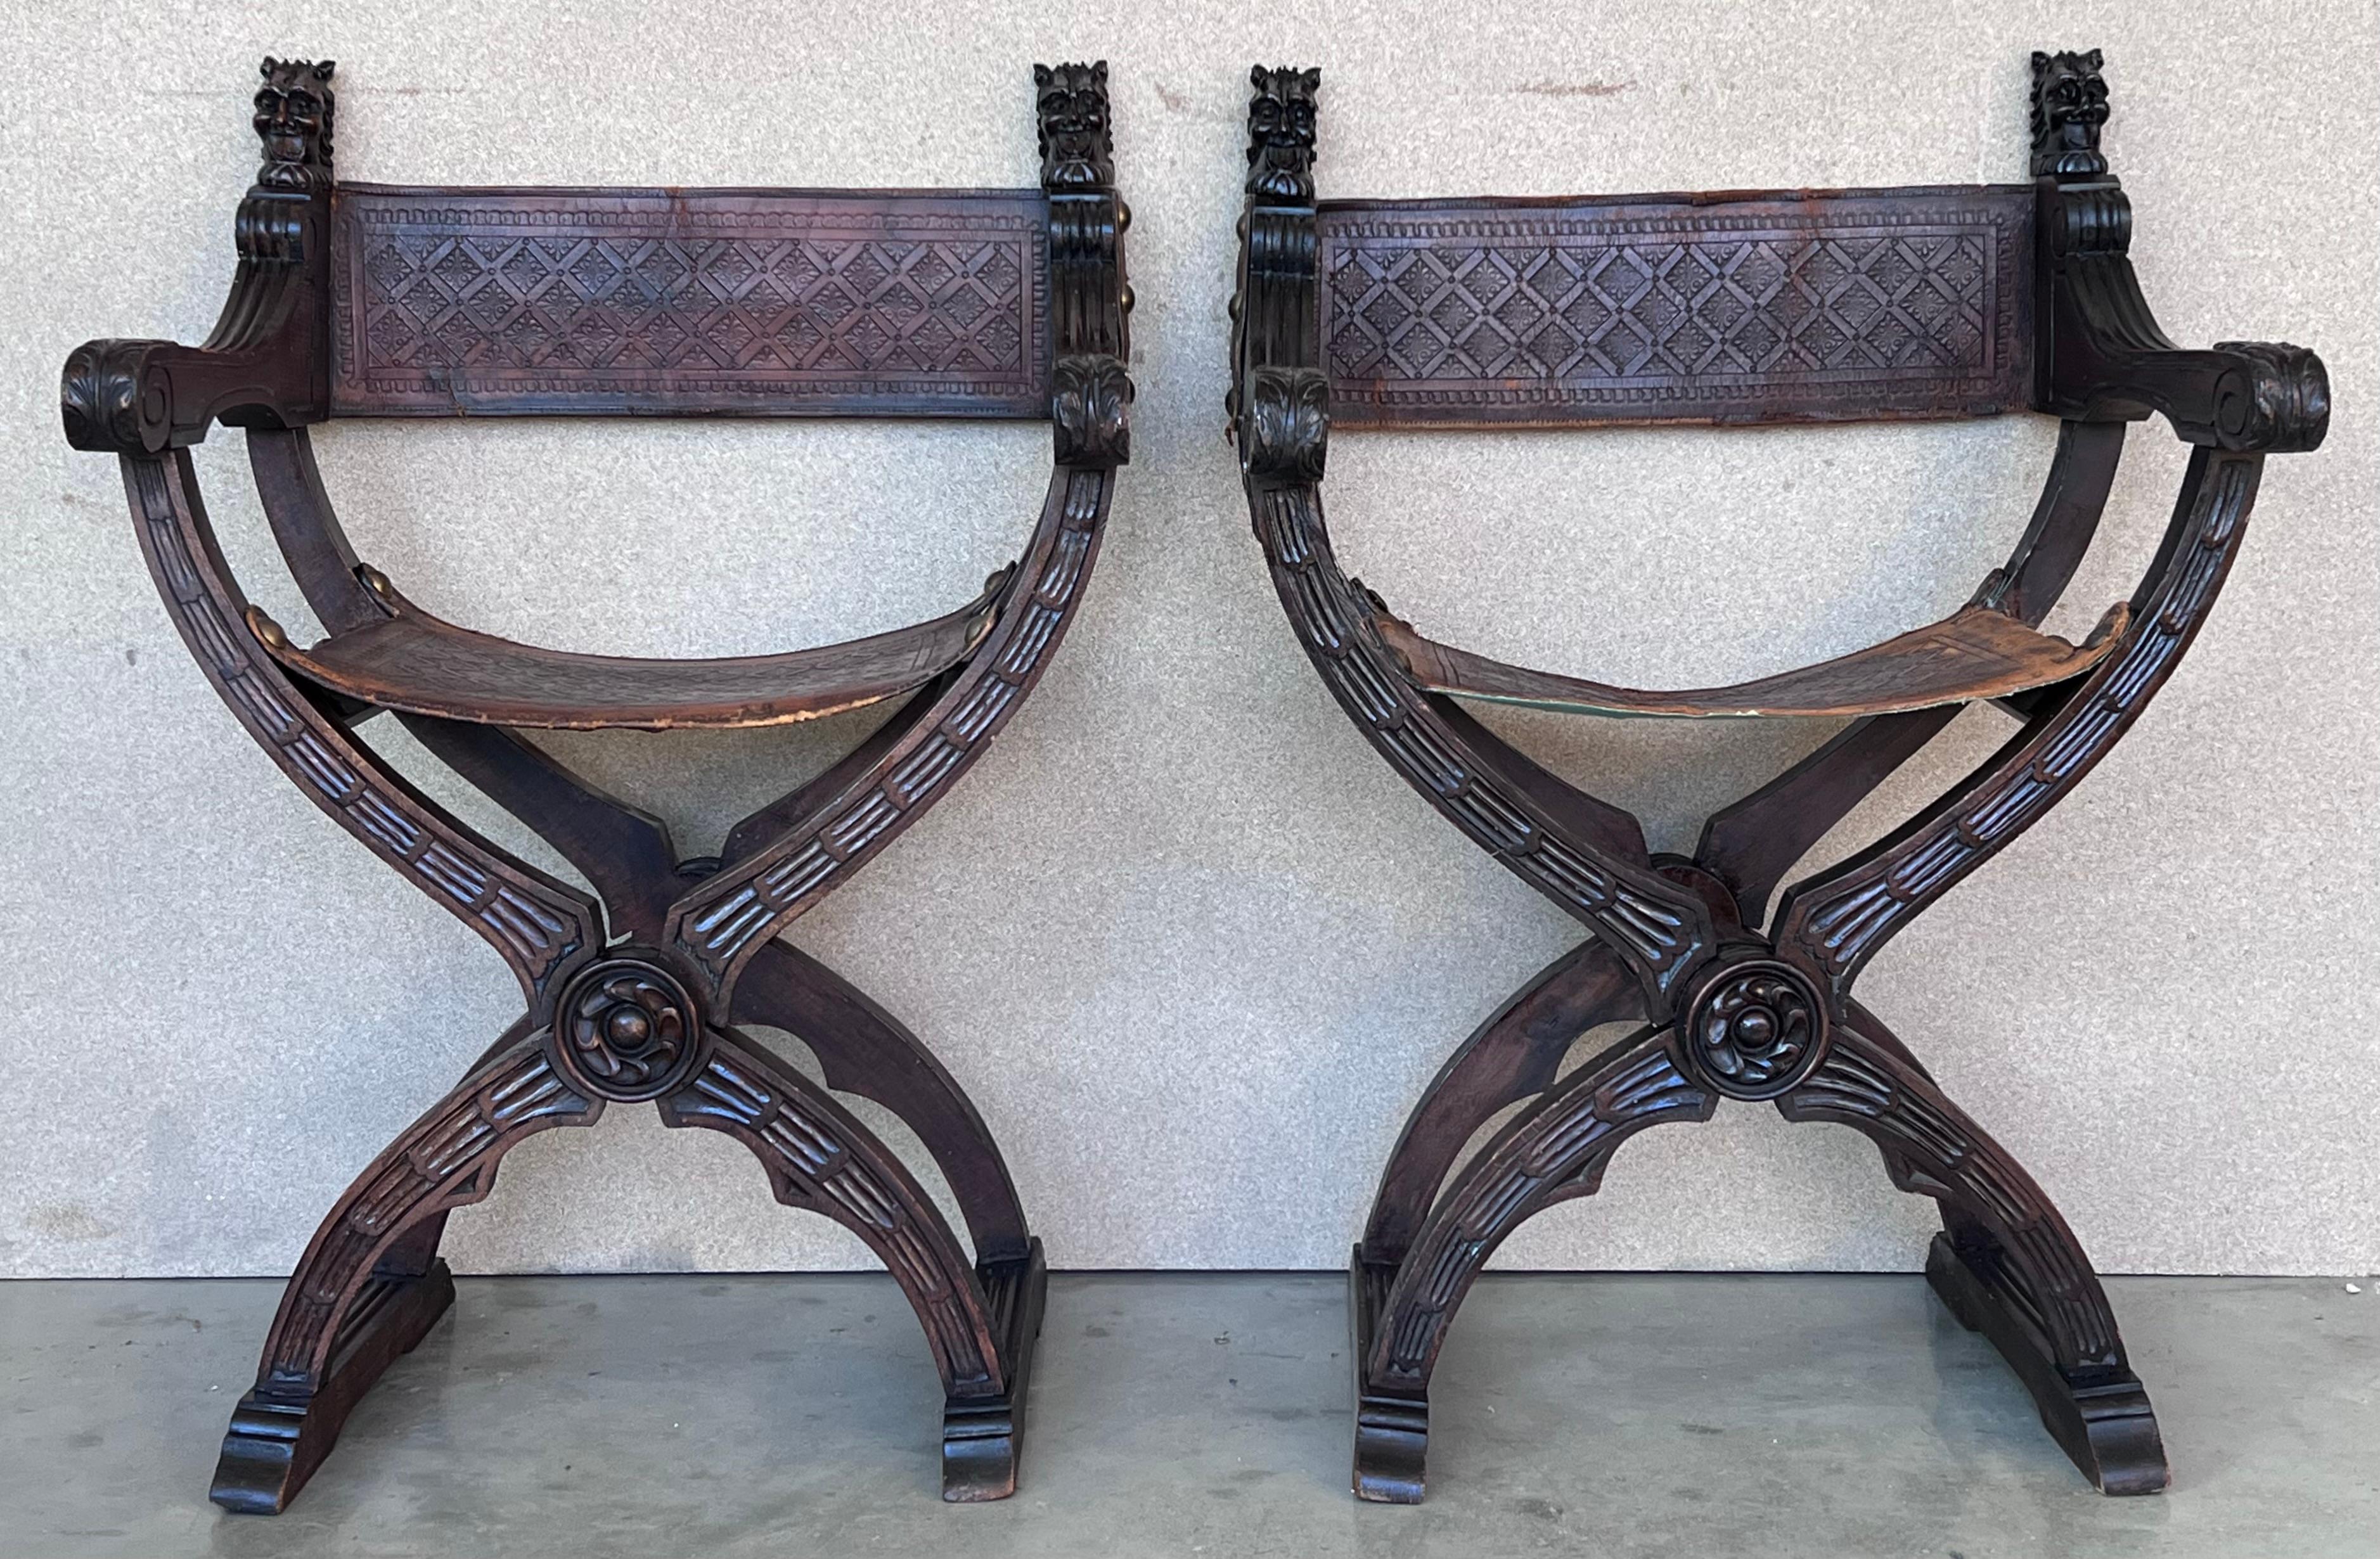 19th century carved walnut folding scissors Savonarola bench or settee featuring a carved shields in the back leather.

Typical of the Italian Renaissance with carved Florentine structure .
This pair created in the 19th century, most likely